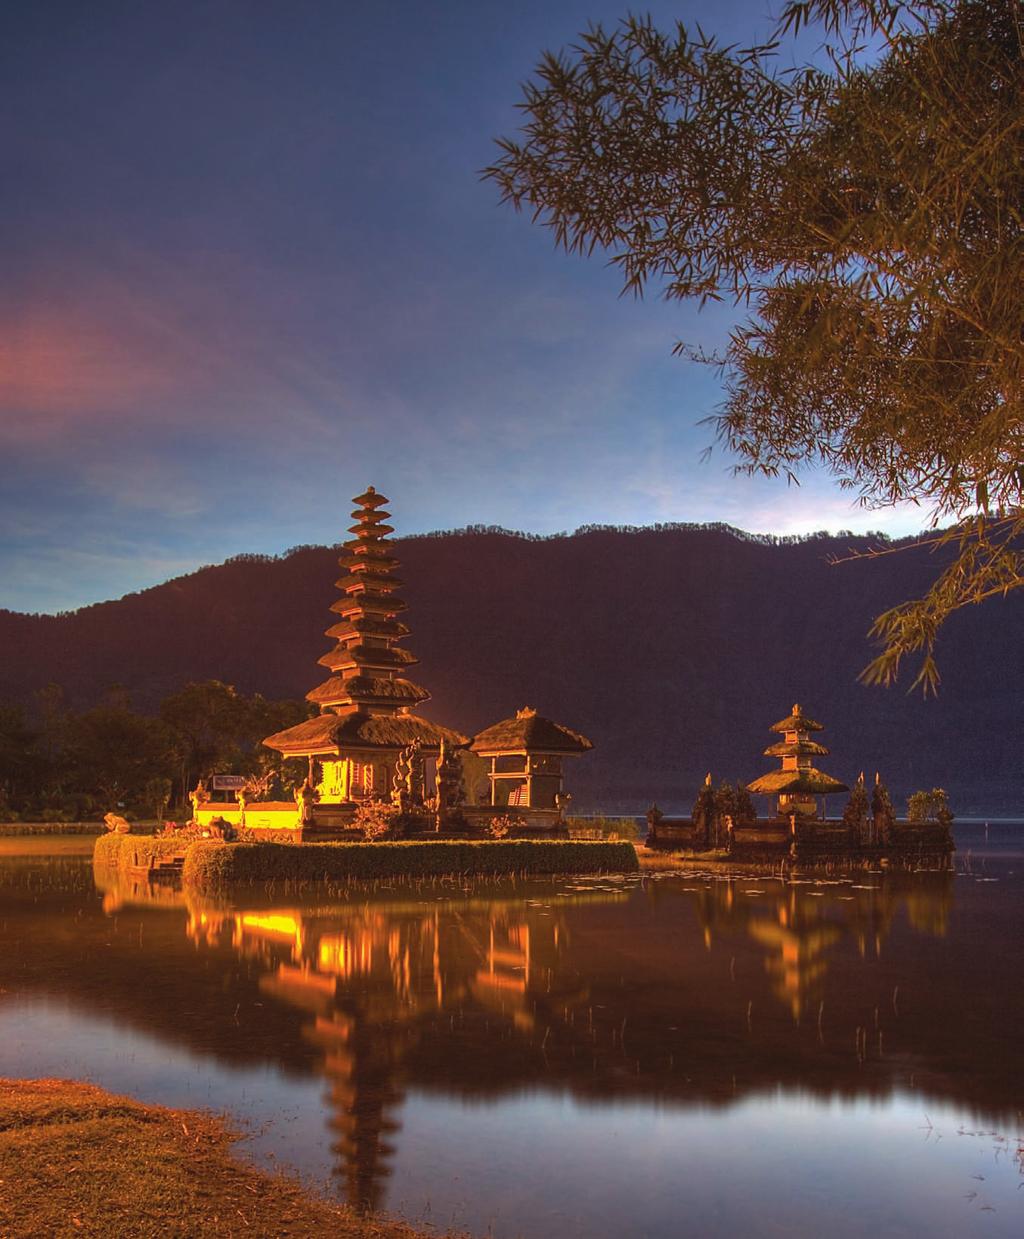 DESTINATION Bali Explored WITH POSTCARD-PERFECT BEACHES, CHARMING TOWNS AND A LUSH LANDSCAPE, THIS IDYLLIC ISLAND PROMISES AND DELIVERS A PIECE OF PARADISE.